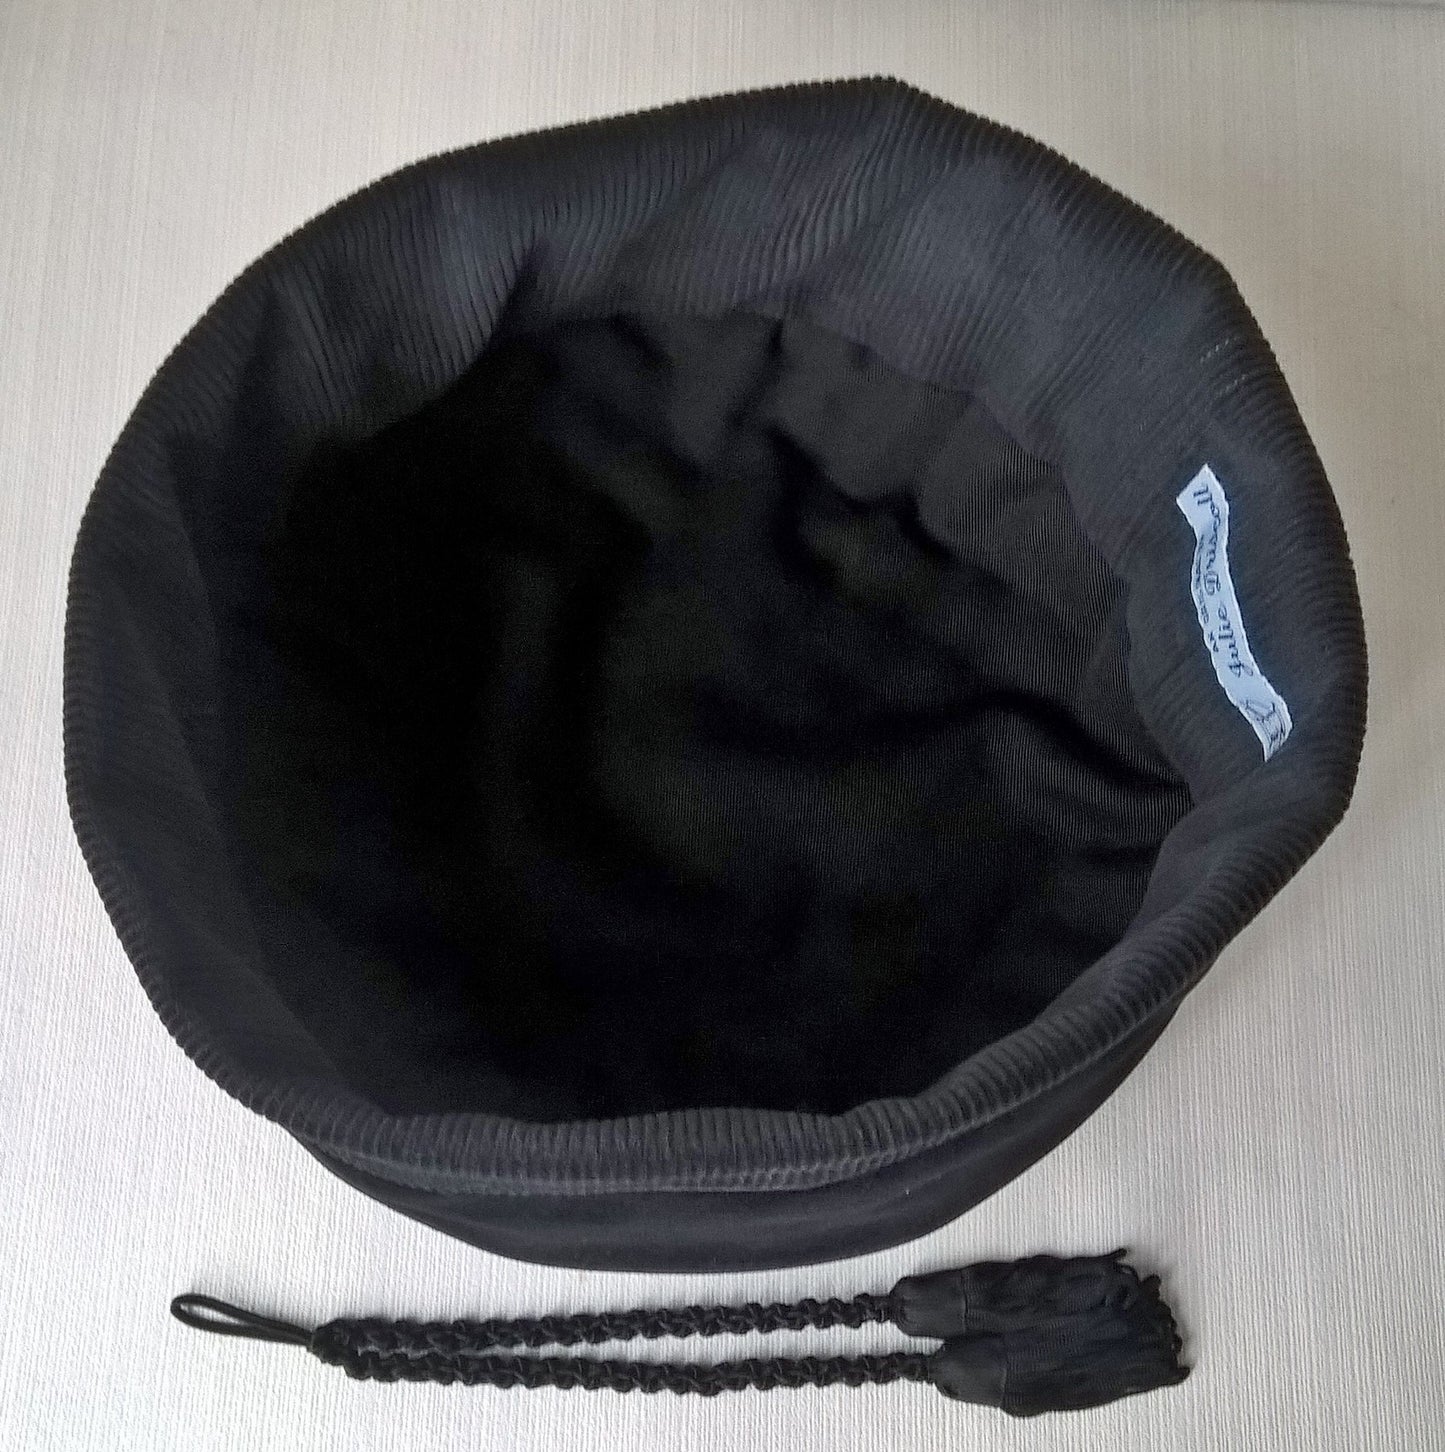 Cotton lining of felted smoking cap